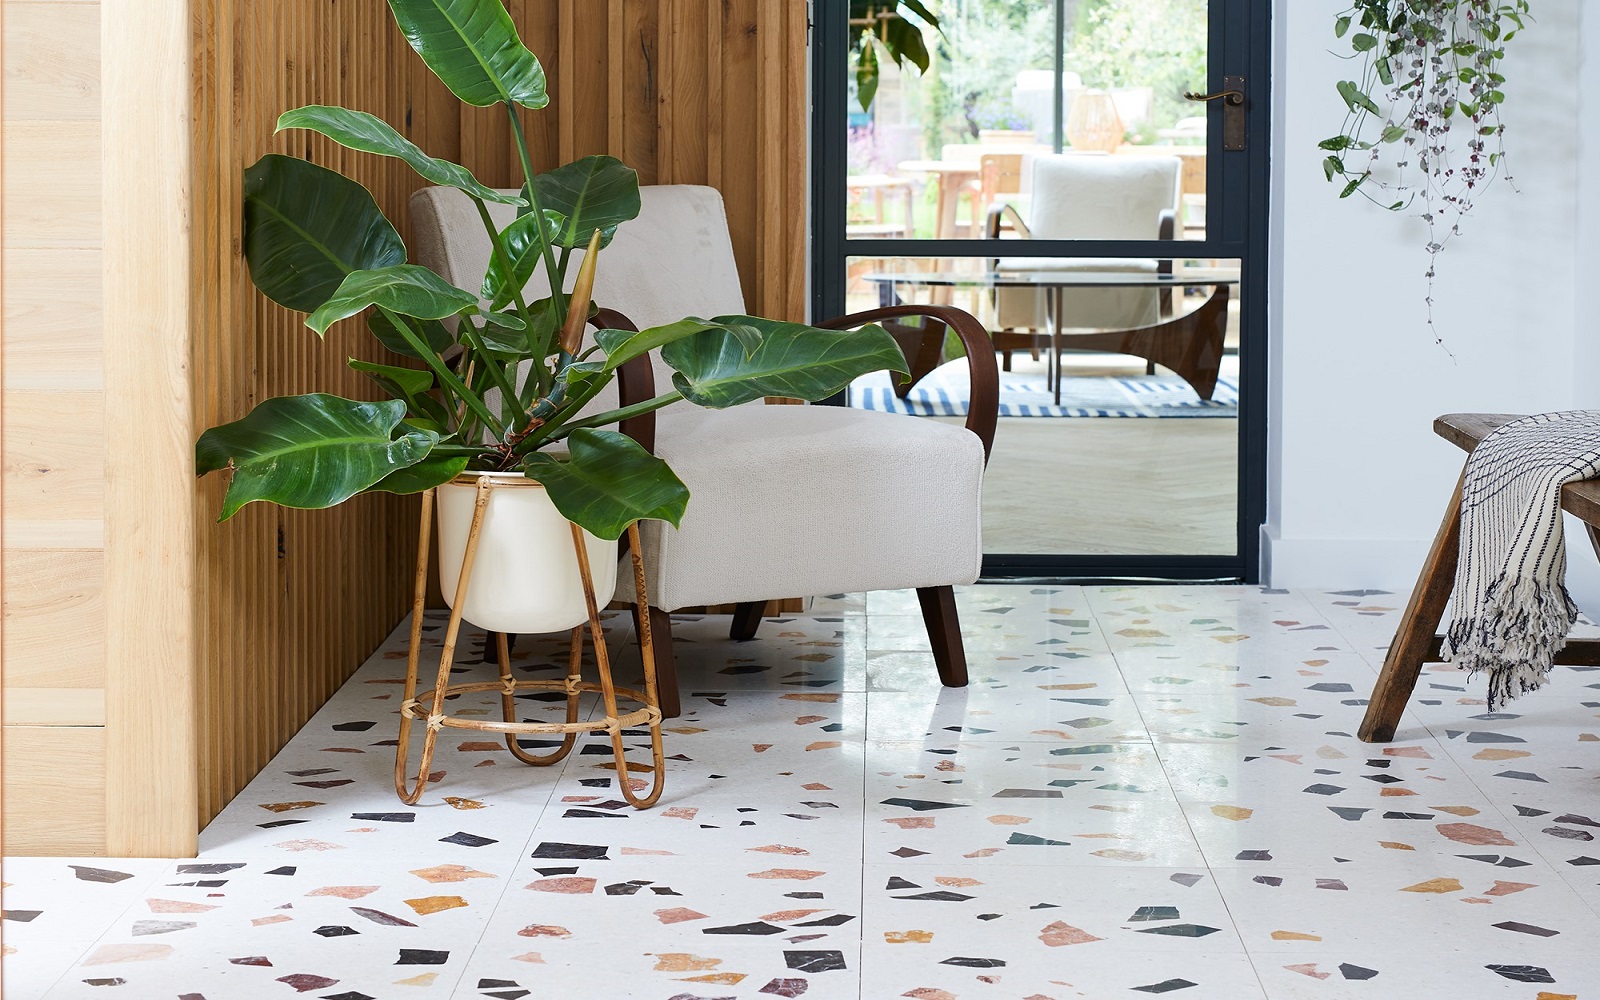 entrance hall with chair and plant and Bert & May course terrazzo style tiles on the floor